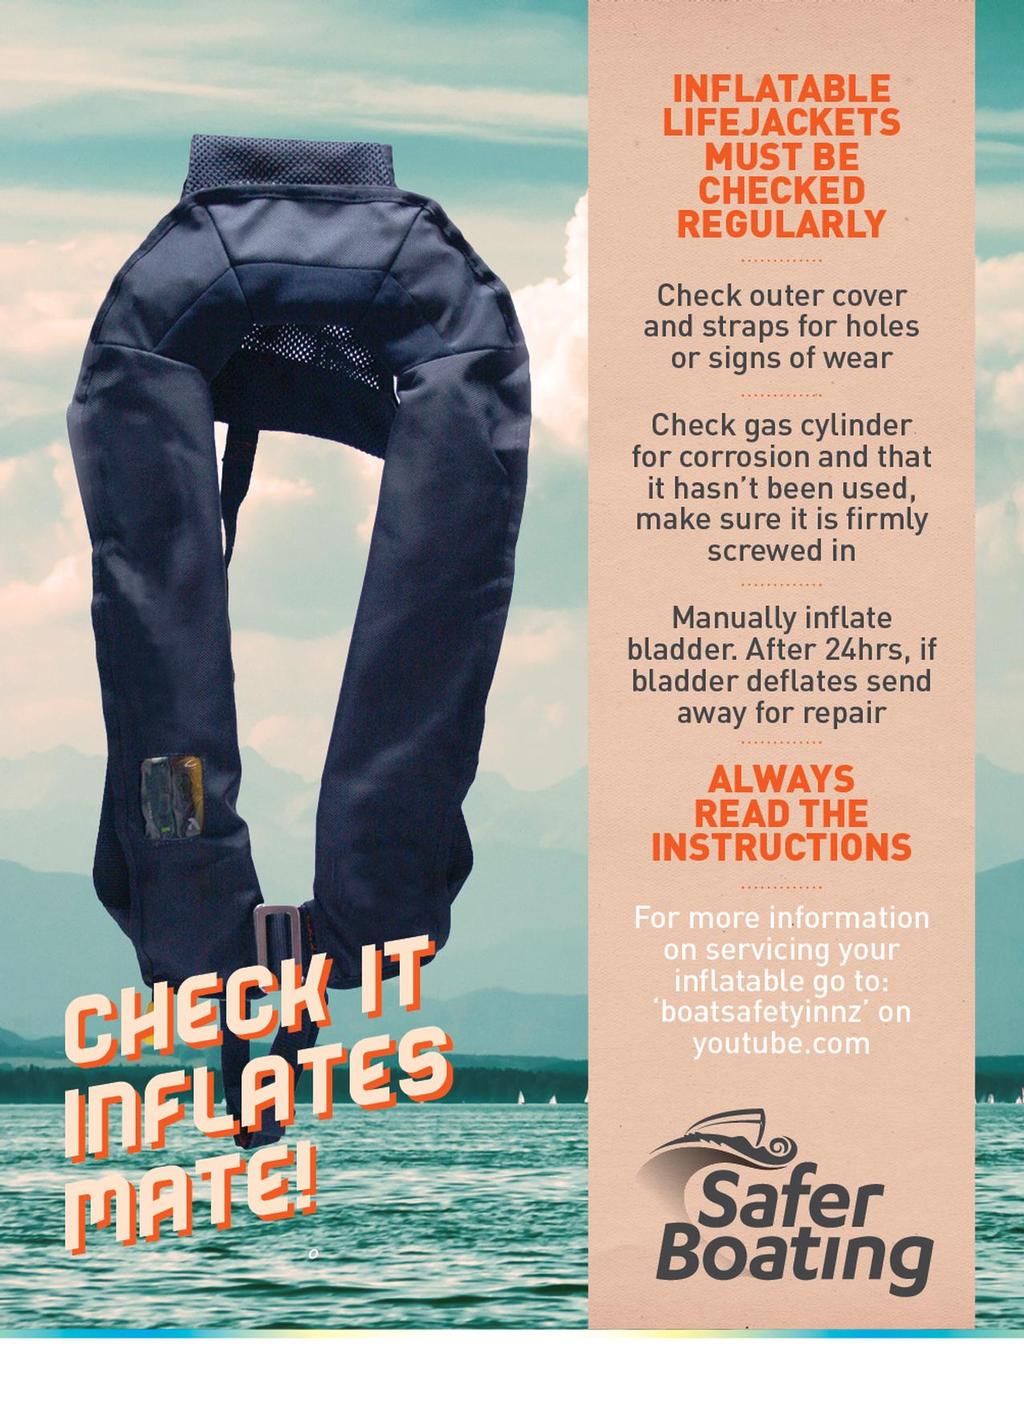 For the first time, simple guidelines for self-servicing inflatable lifejackets © Maritime New Zealand